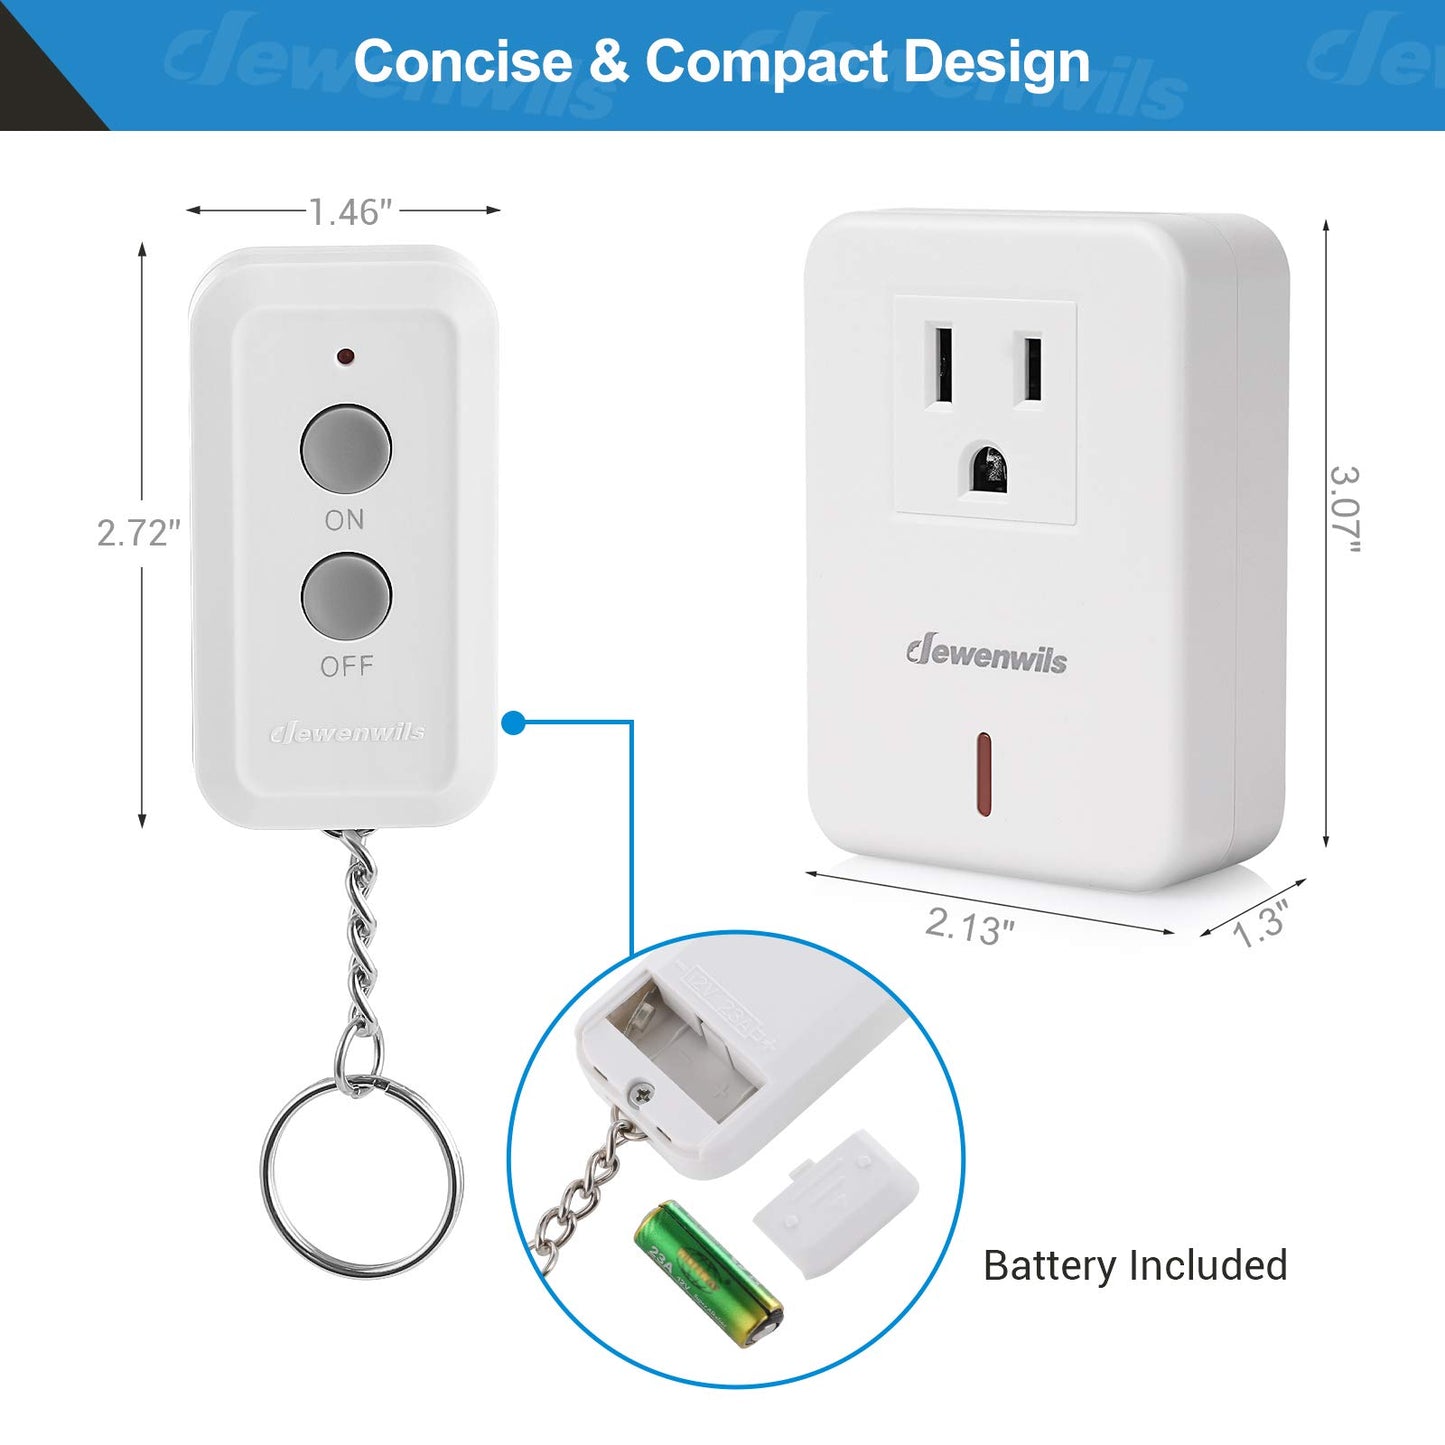 DEWENWILS Indoor Remote Control Outlet, Expandable Remote Light Switch Kit, Wireless On Off Power Switch, 100ft RF Range, Compact Design, White